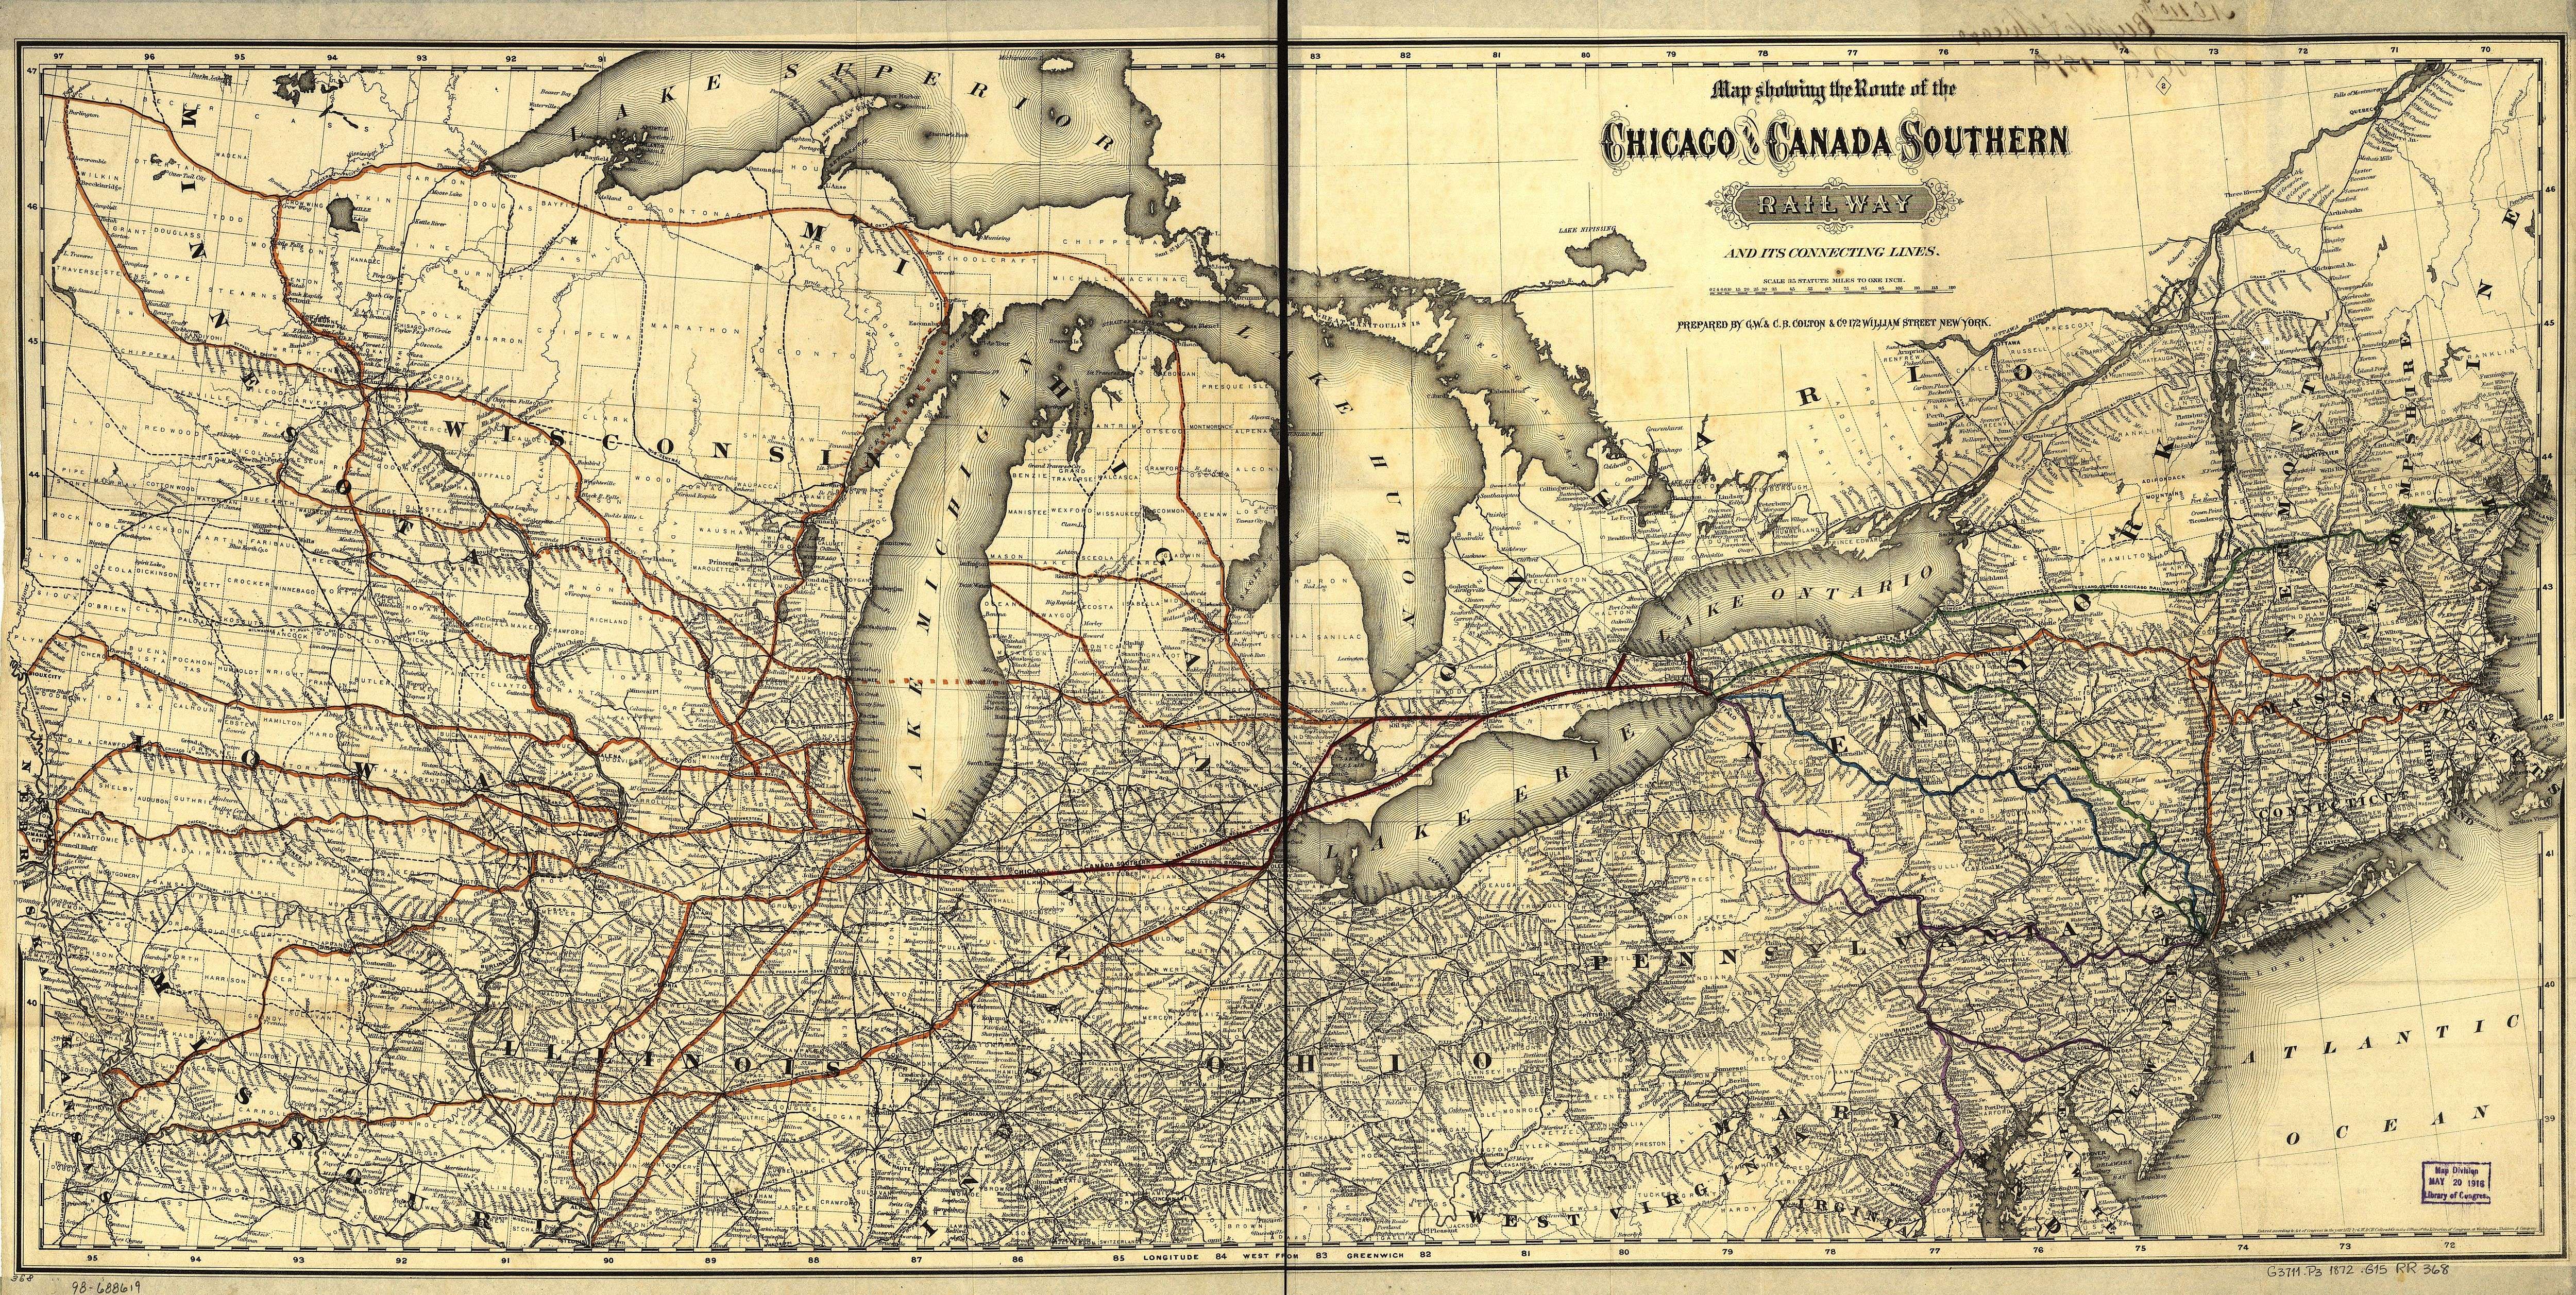 Most of present day Charlevoix County was originally part of Emmet County.